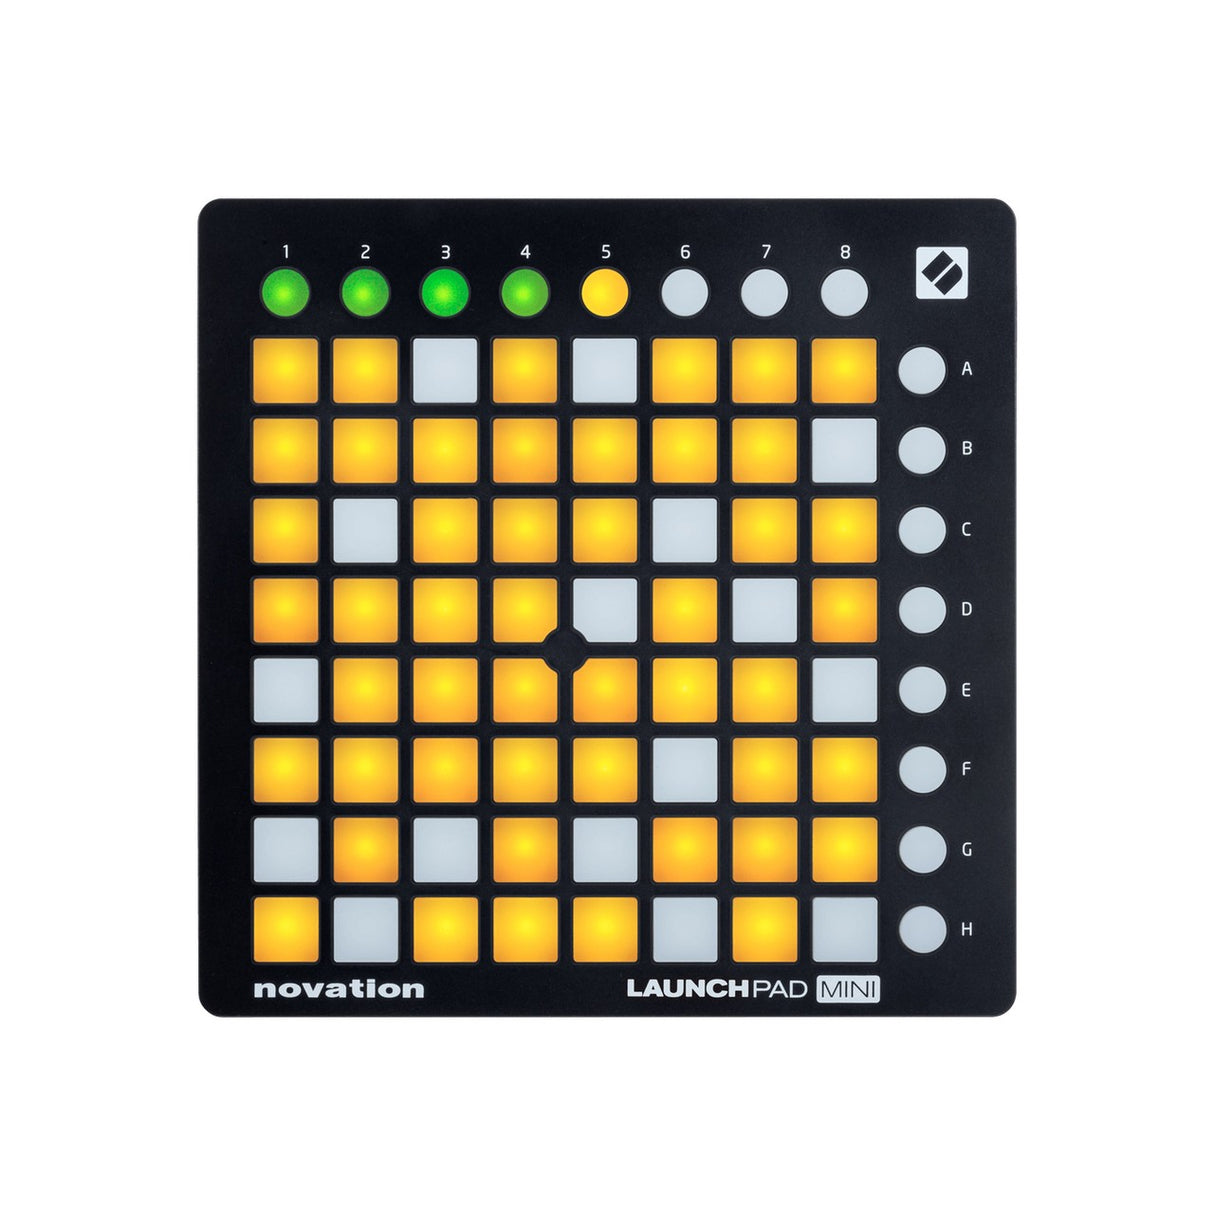 Novation Launchpad Mini | Compact USB Grid Controller for Ableton Live with 64 Colored Pads